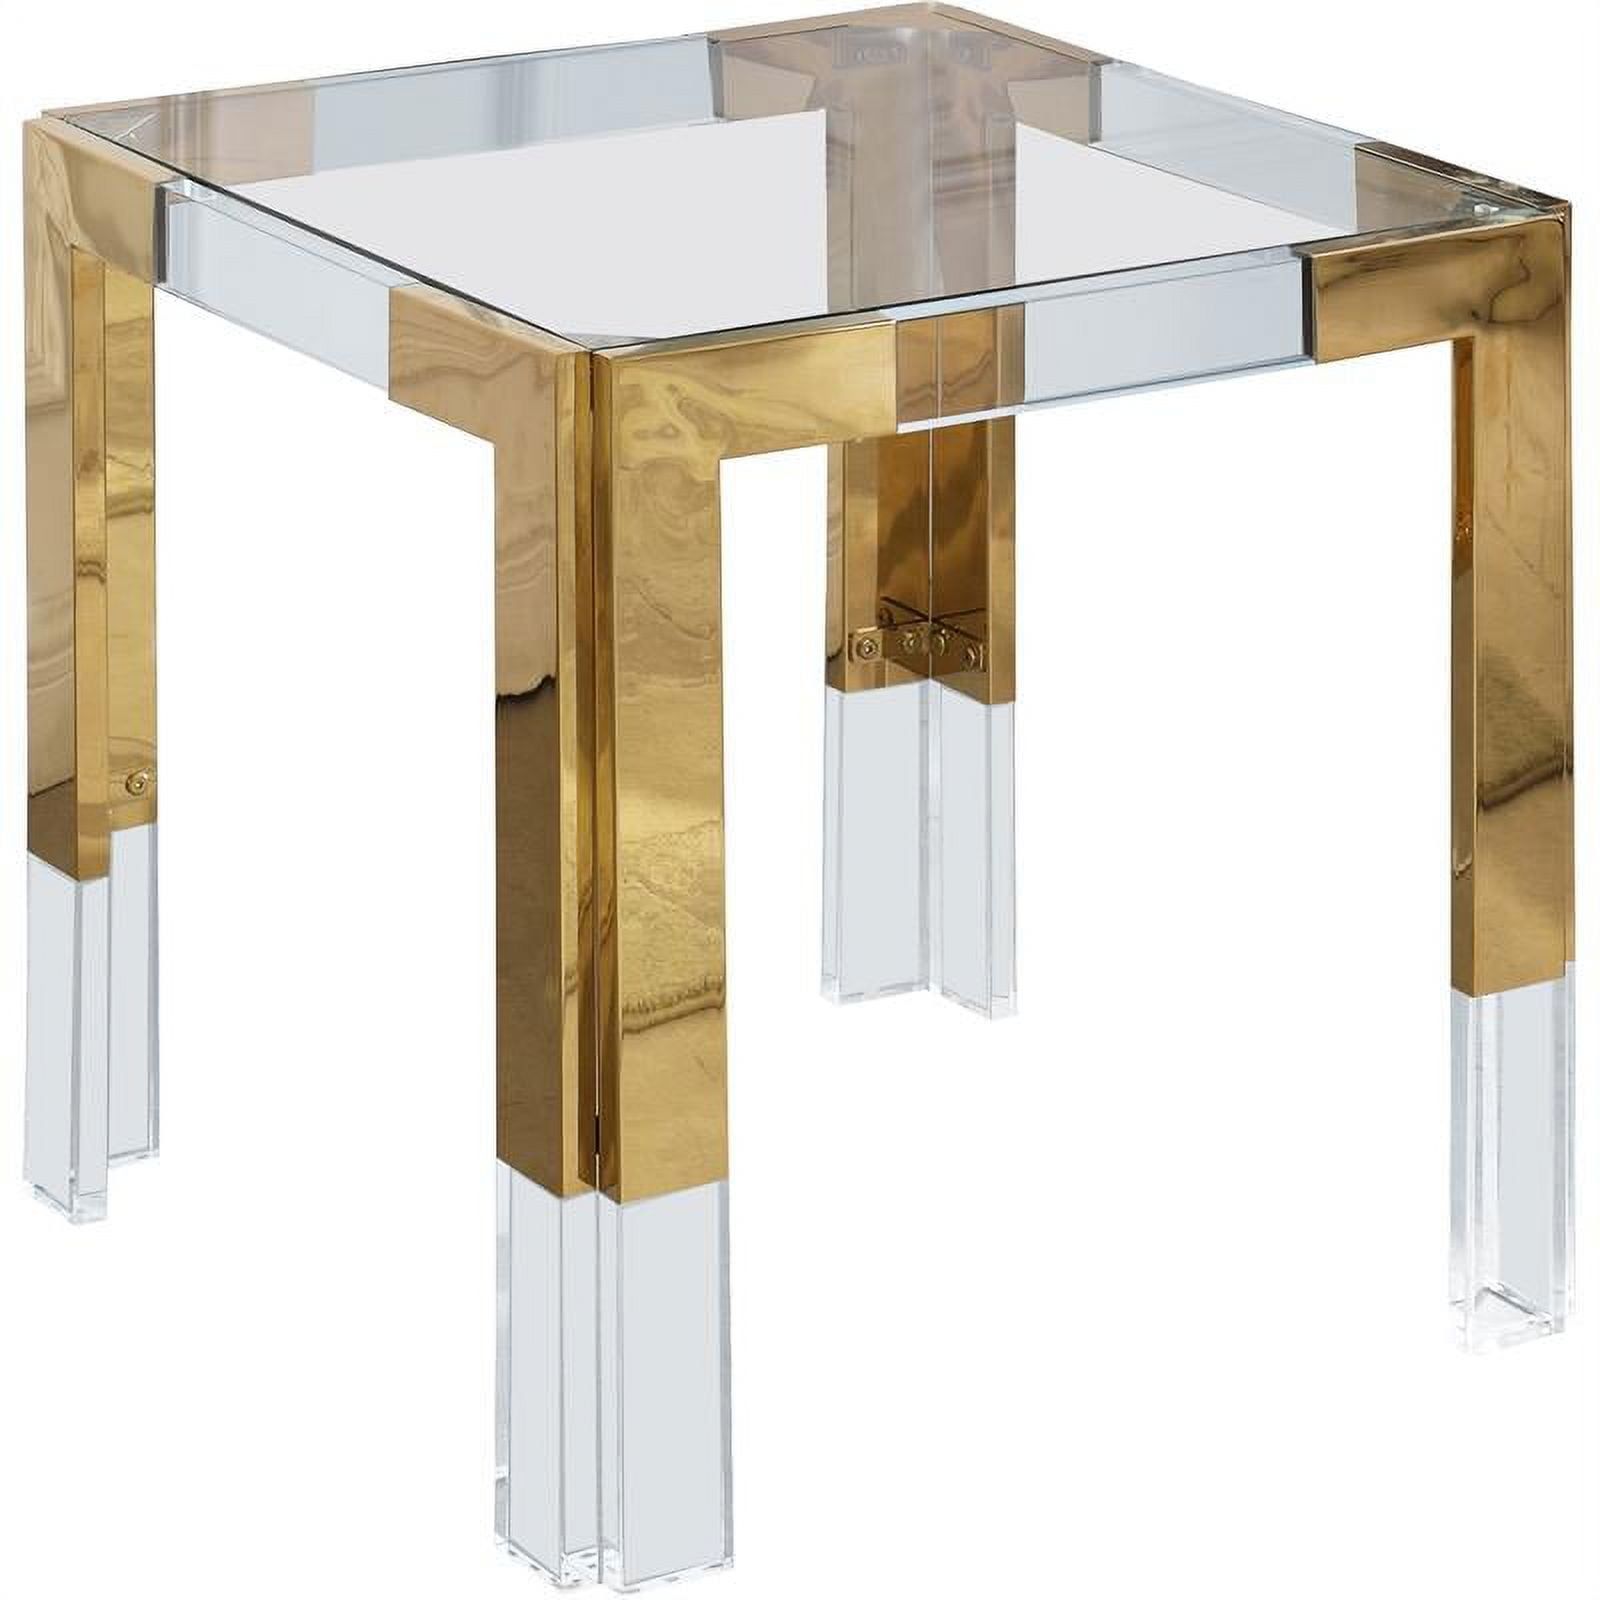 Casper Gold Stainless Steel and Acrylic Square Glass Top End Table